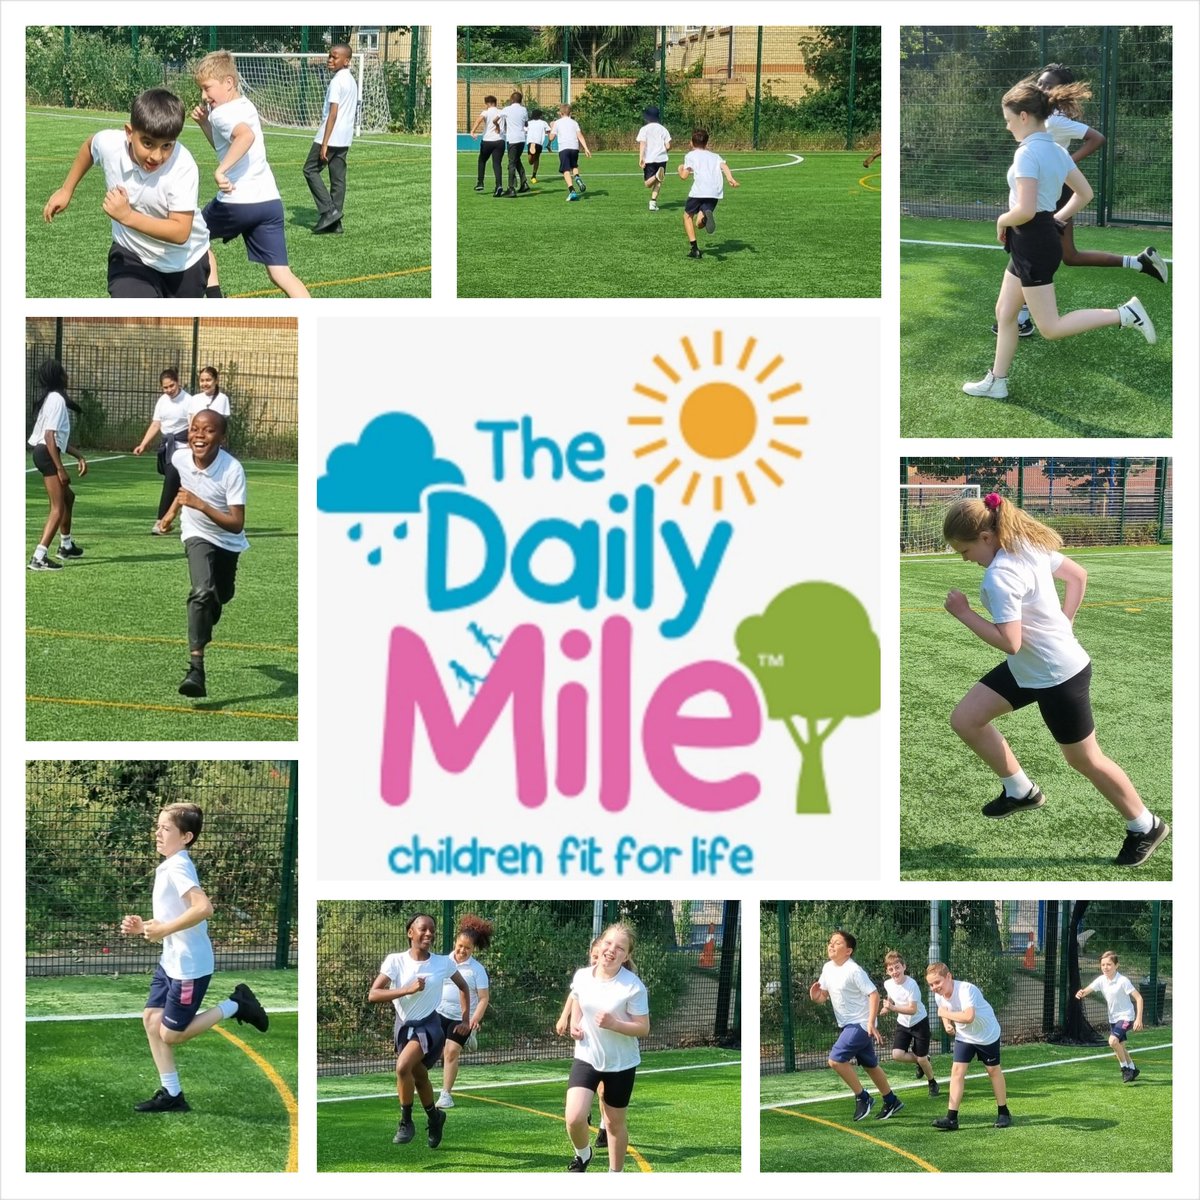 A lovely sunny day to start our week with a gentle run before lessons @_thedailymile 
#healthychoices #run4life